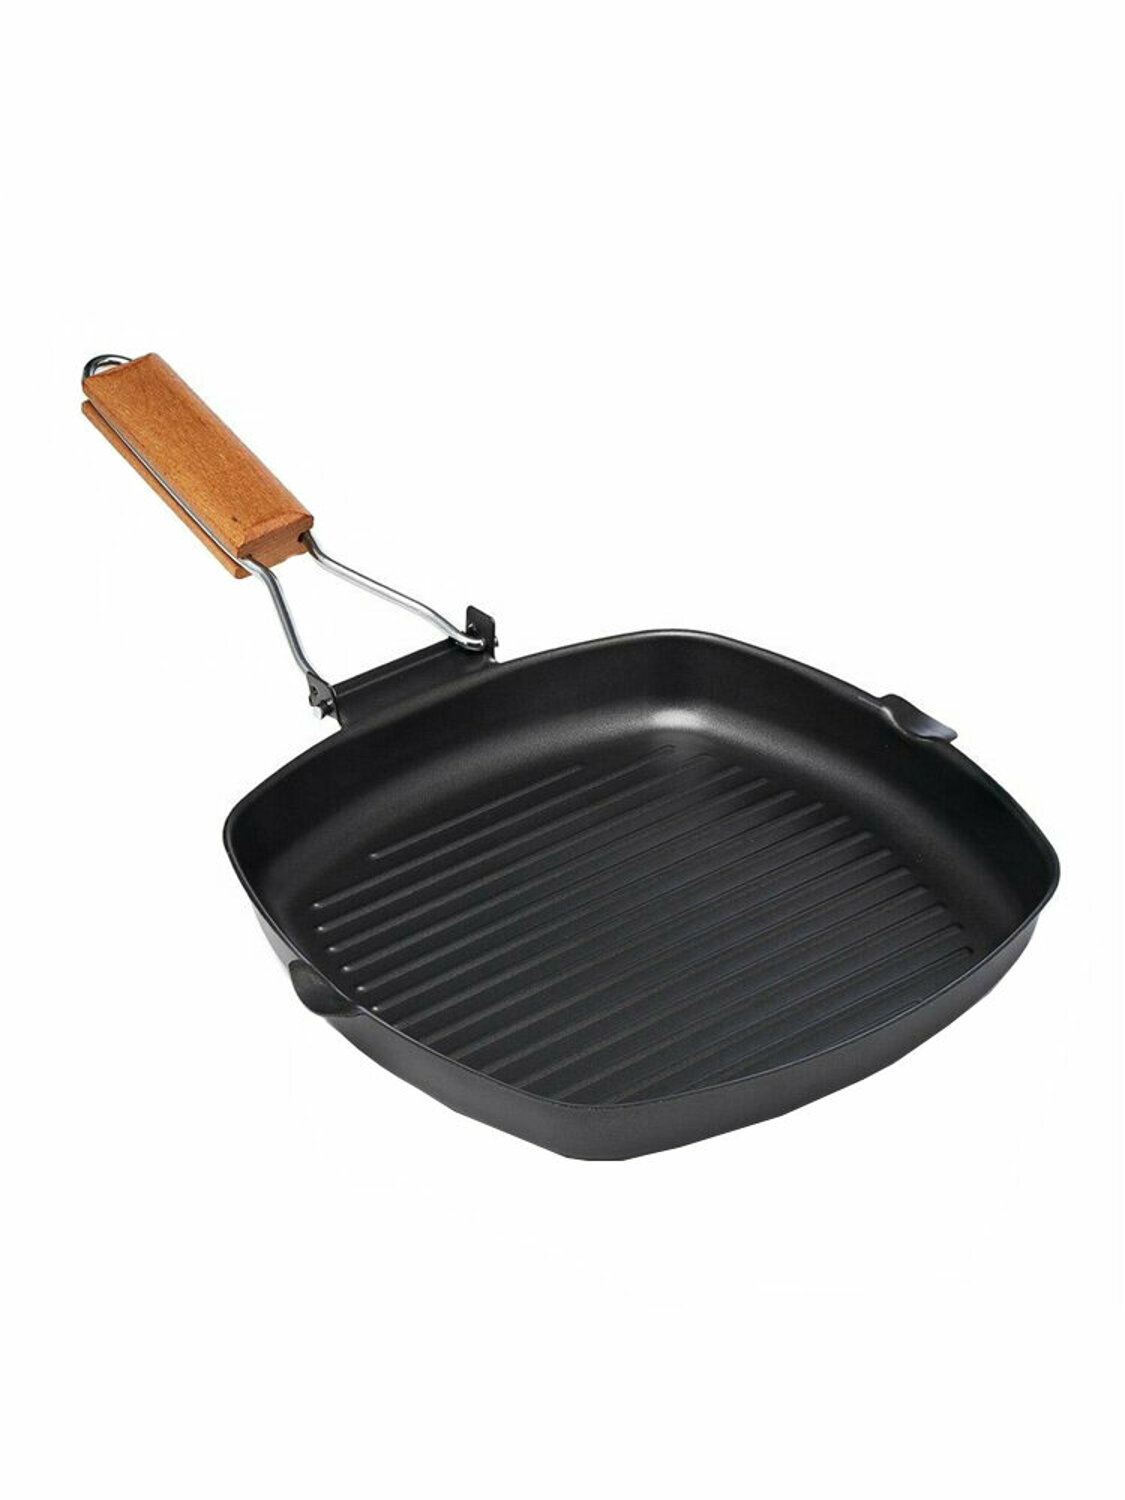 Tigaie GRILL, Vanora Delis, 24 x 3.5 cm, VN-SYN-XB01, reducere mare